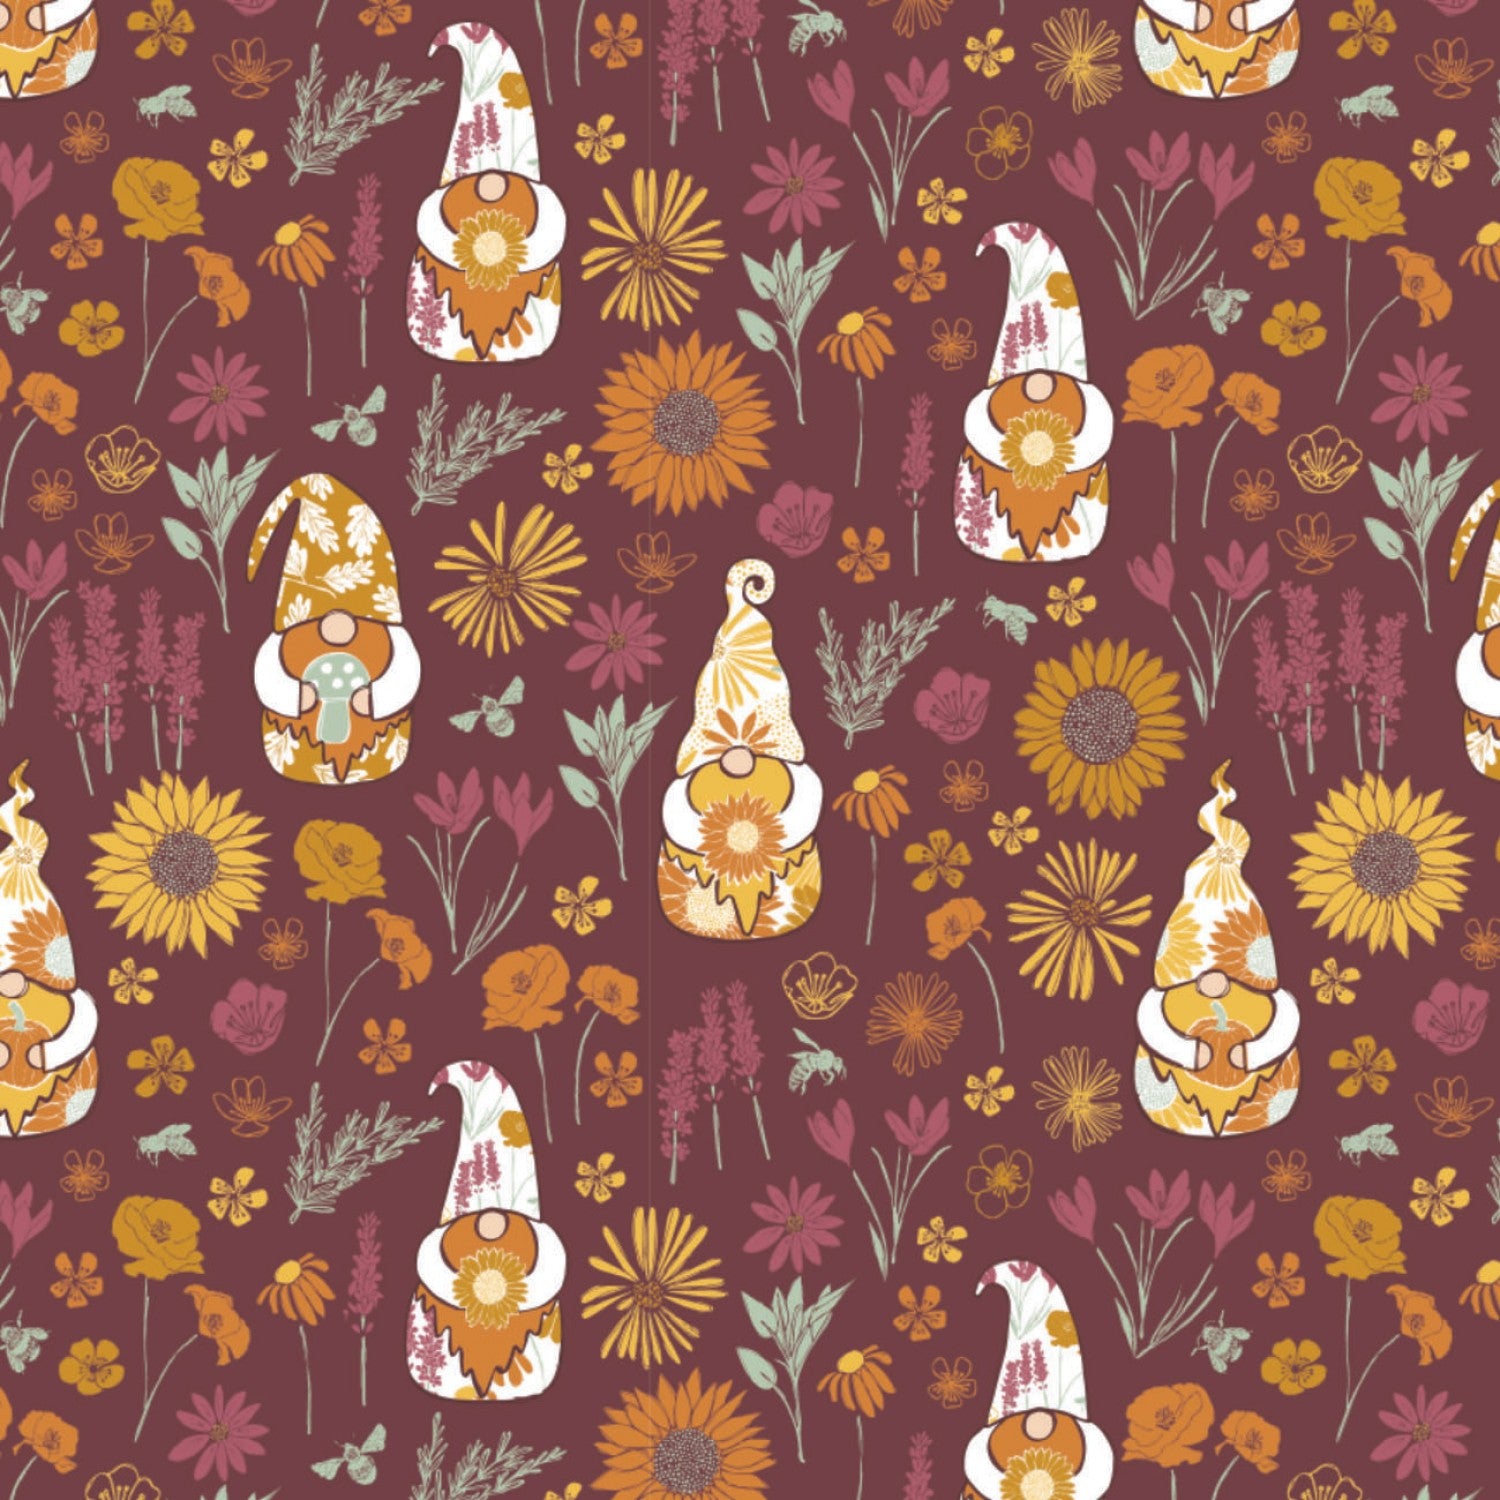 Harvest Time Plum Gnome Worry Be Happy yardage designed by Vicky Yorke for Camelot Fabrics